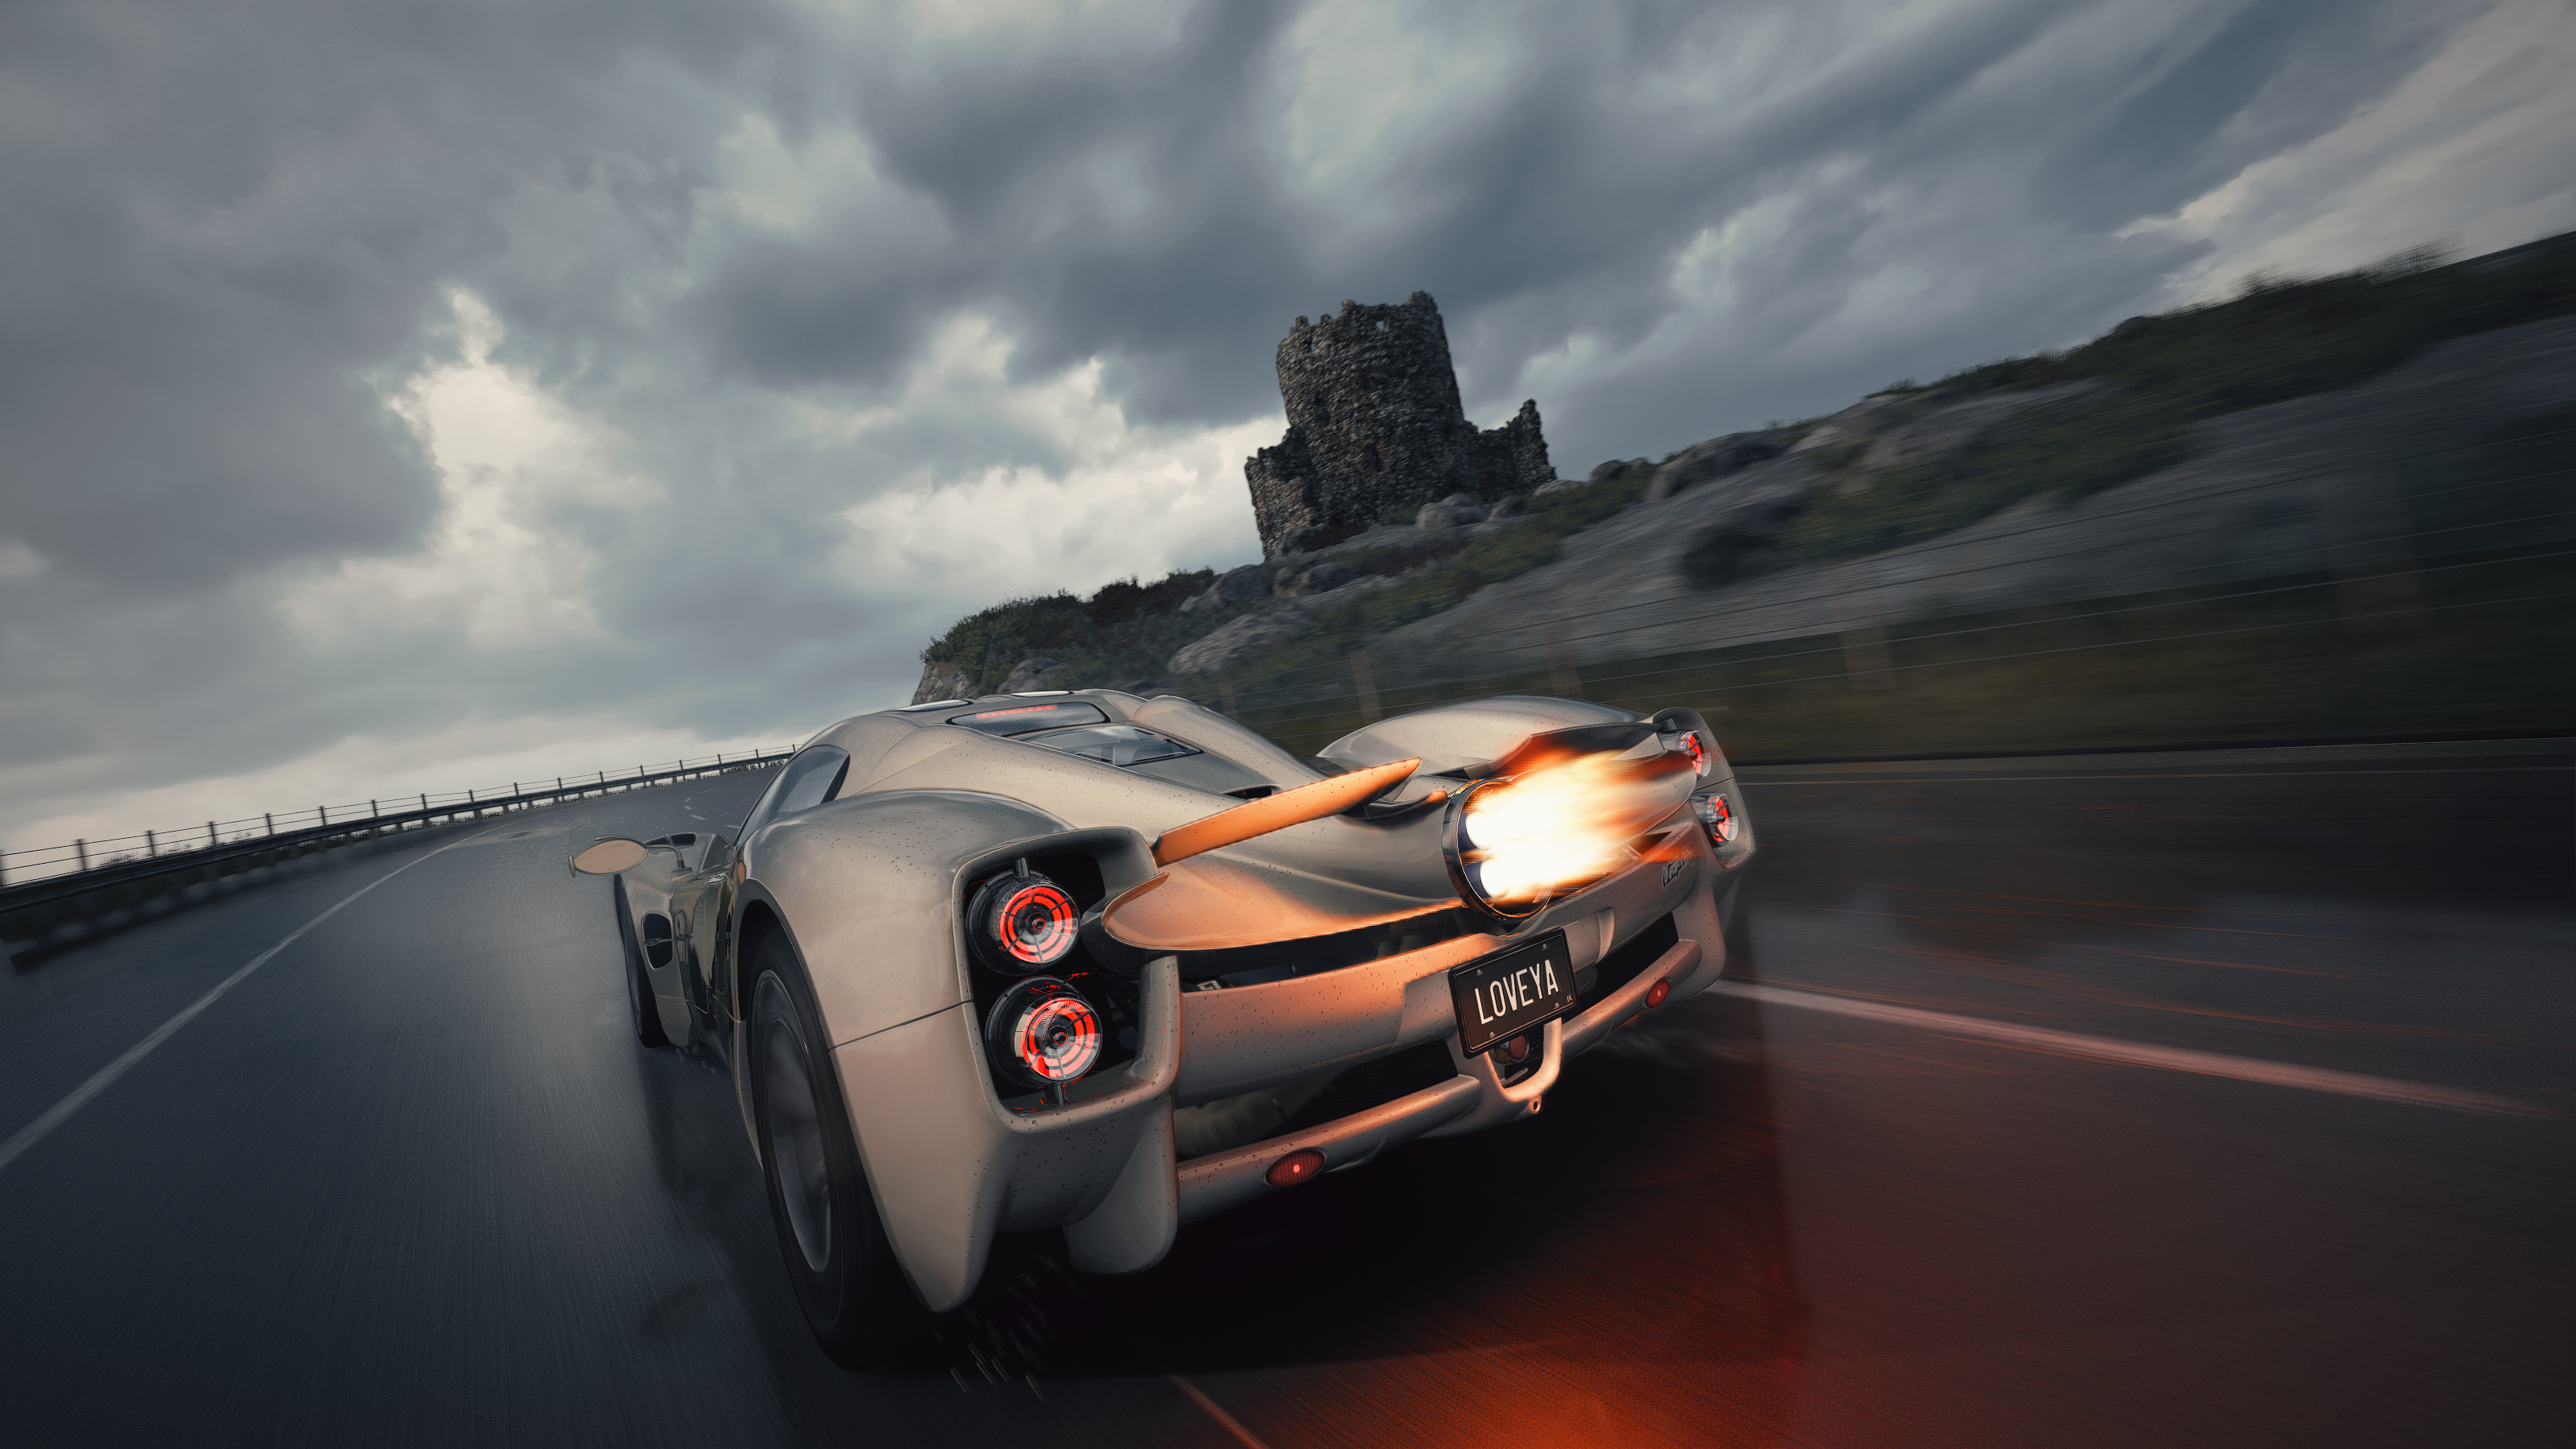 General 3200x1800 Pagani Pagani utopia Assetto Corsa 4K gaming Scottish Highlands white car rear view video game art driving exaust flare